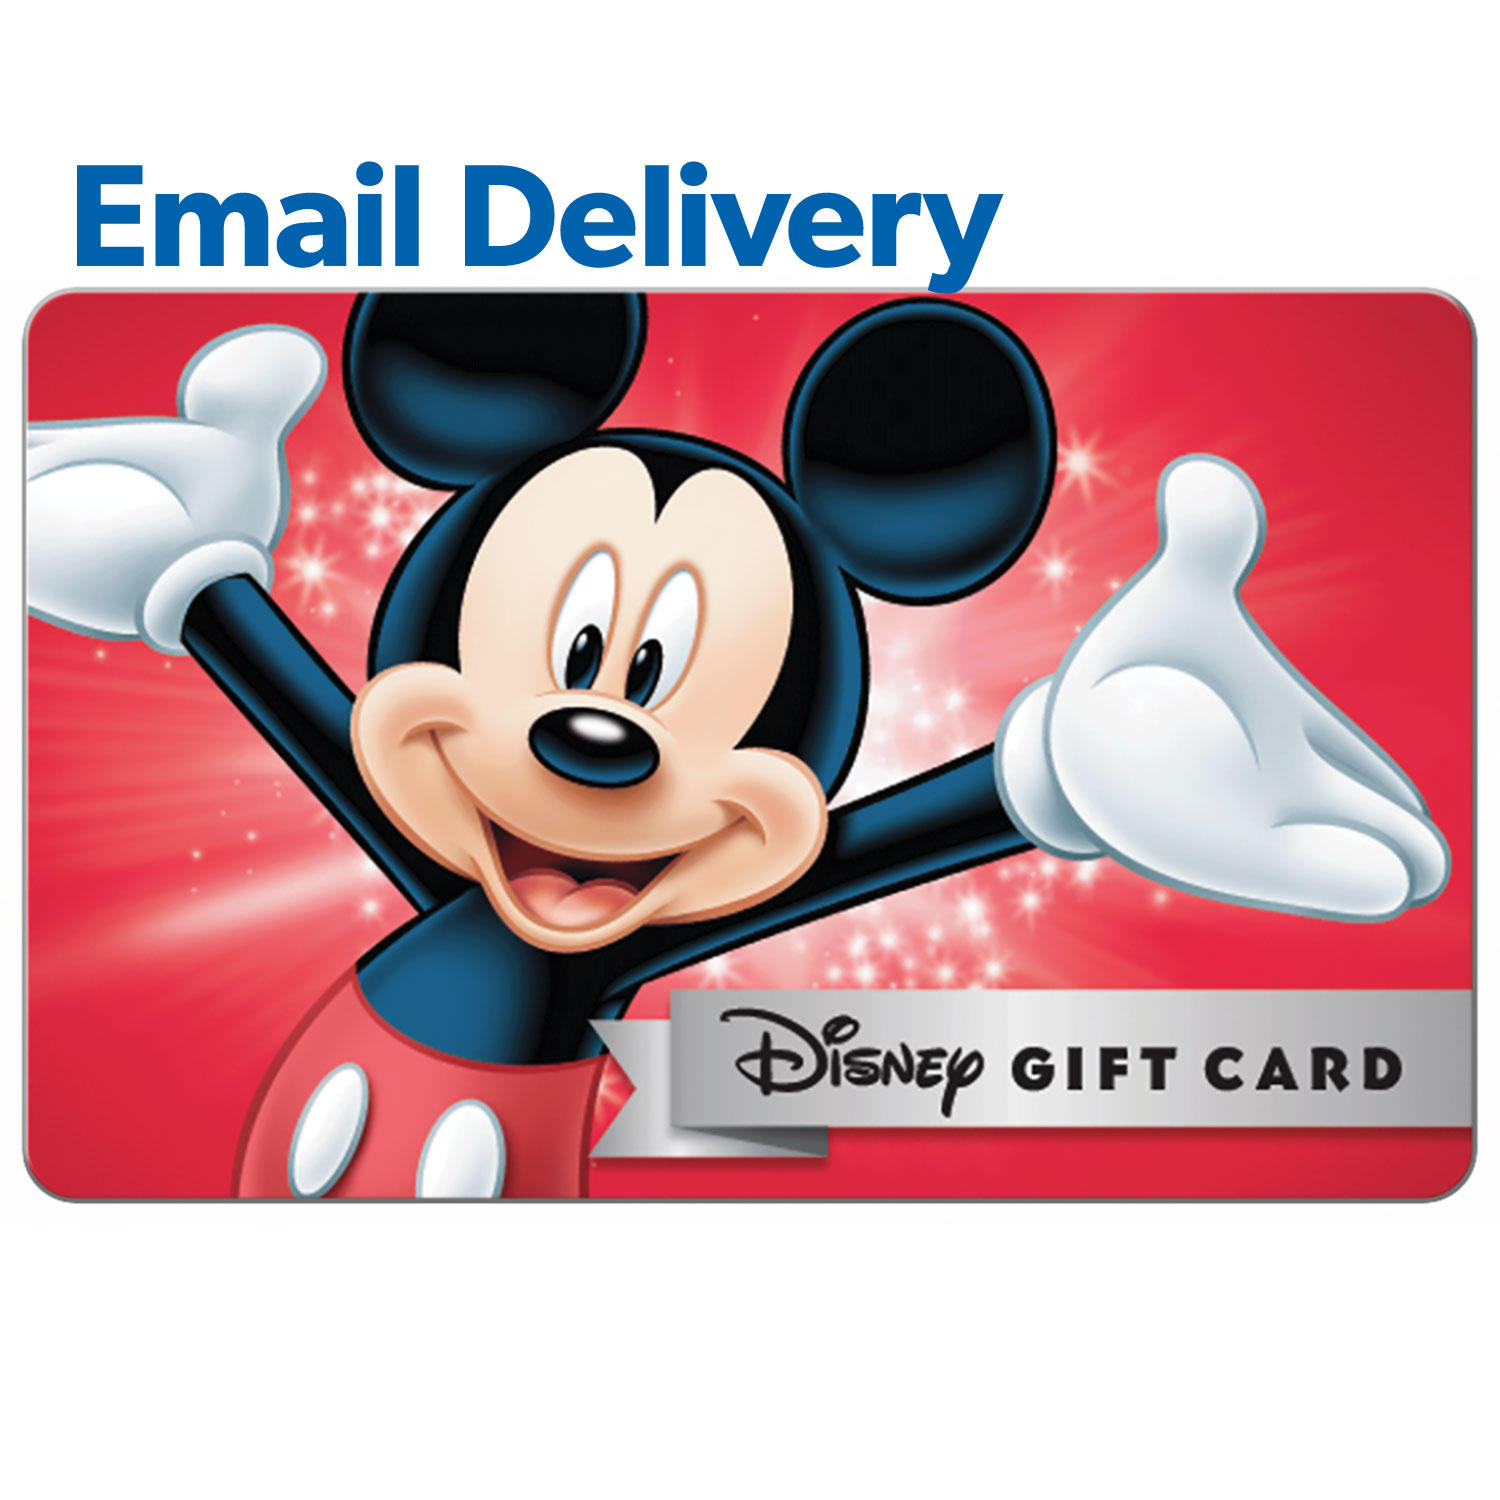 Disney $100 Email Delivery Gift Card